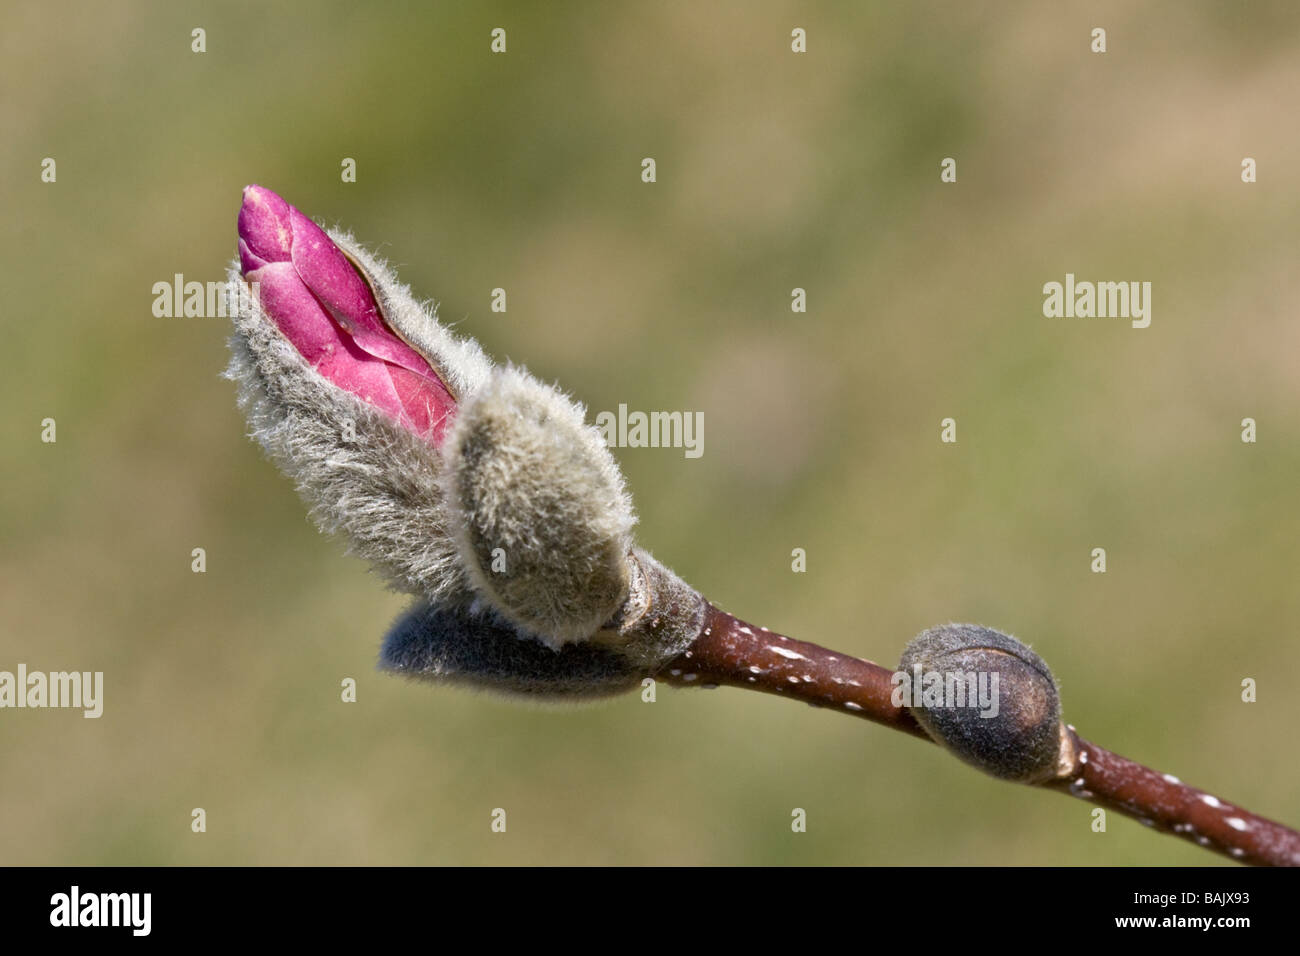 Closeup image of an opening bud of a magnolia tree Stock Photo